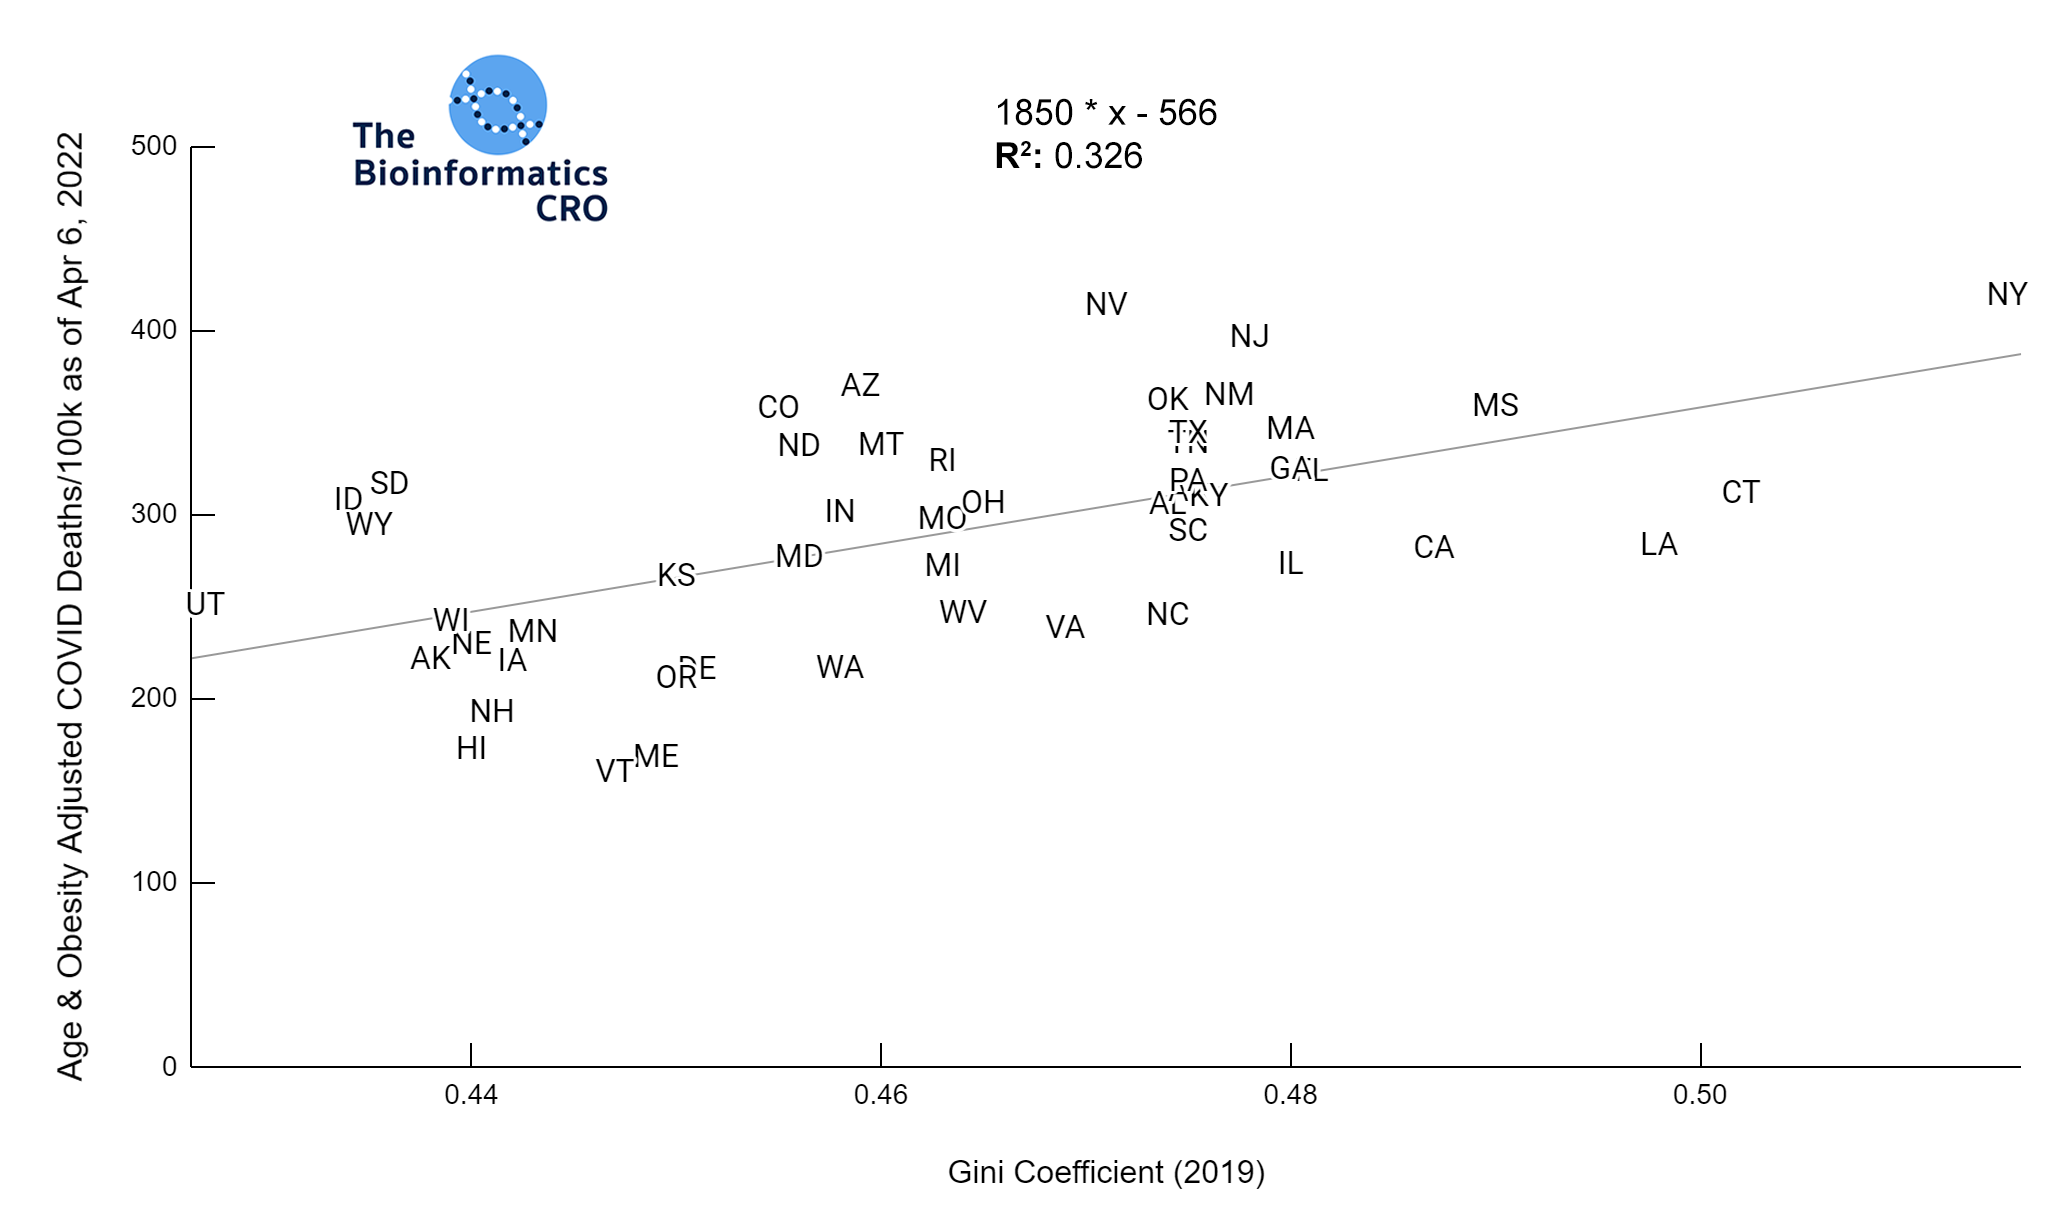 Age & Obesity adjusted COVID Deaths versus Gini Coefficient 2019 | y = 1850 * x - 566 | R^2 = 0.326